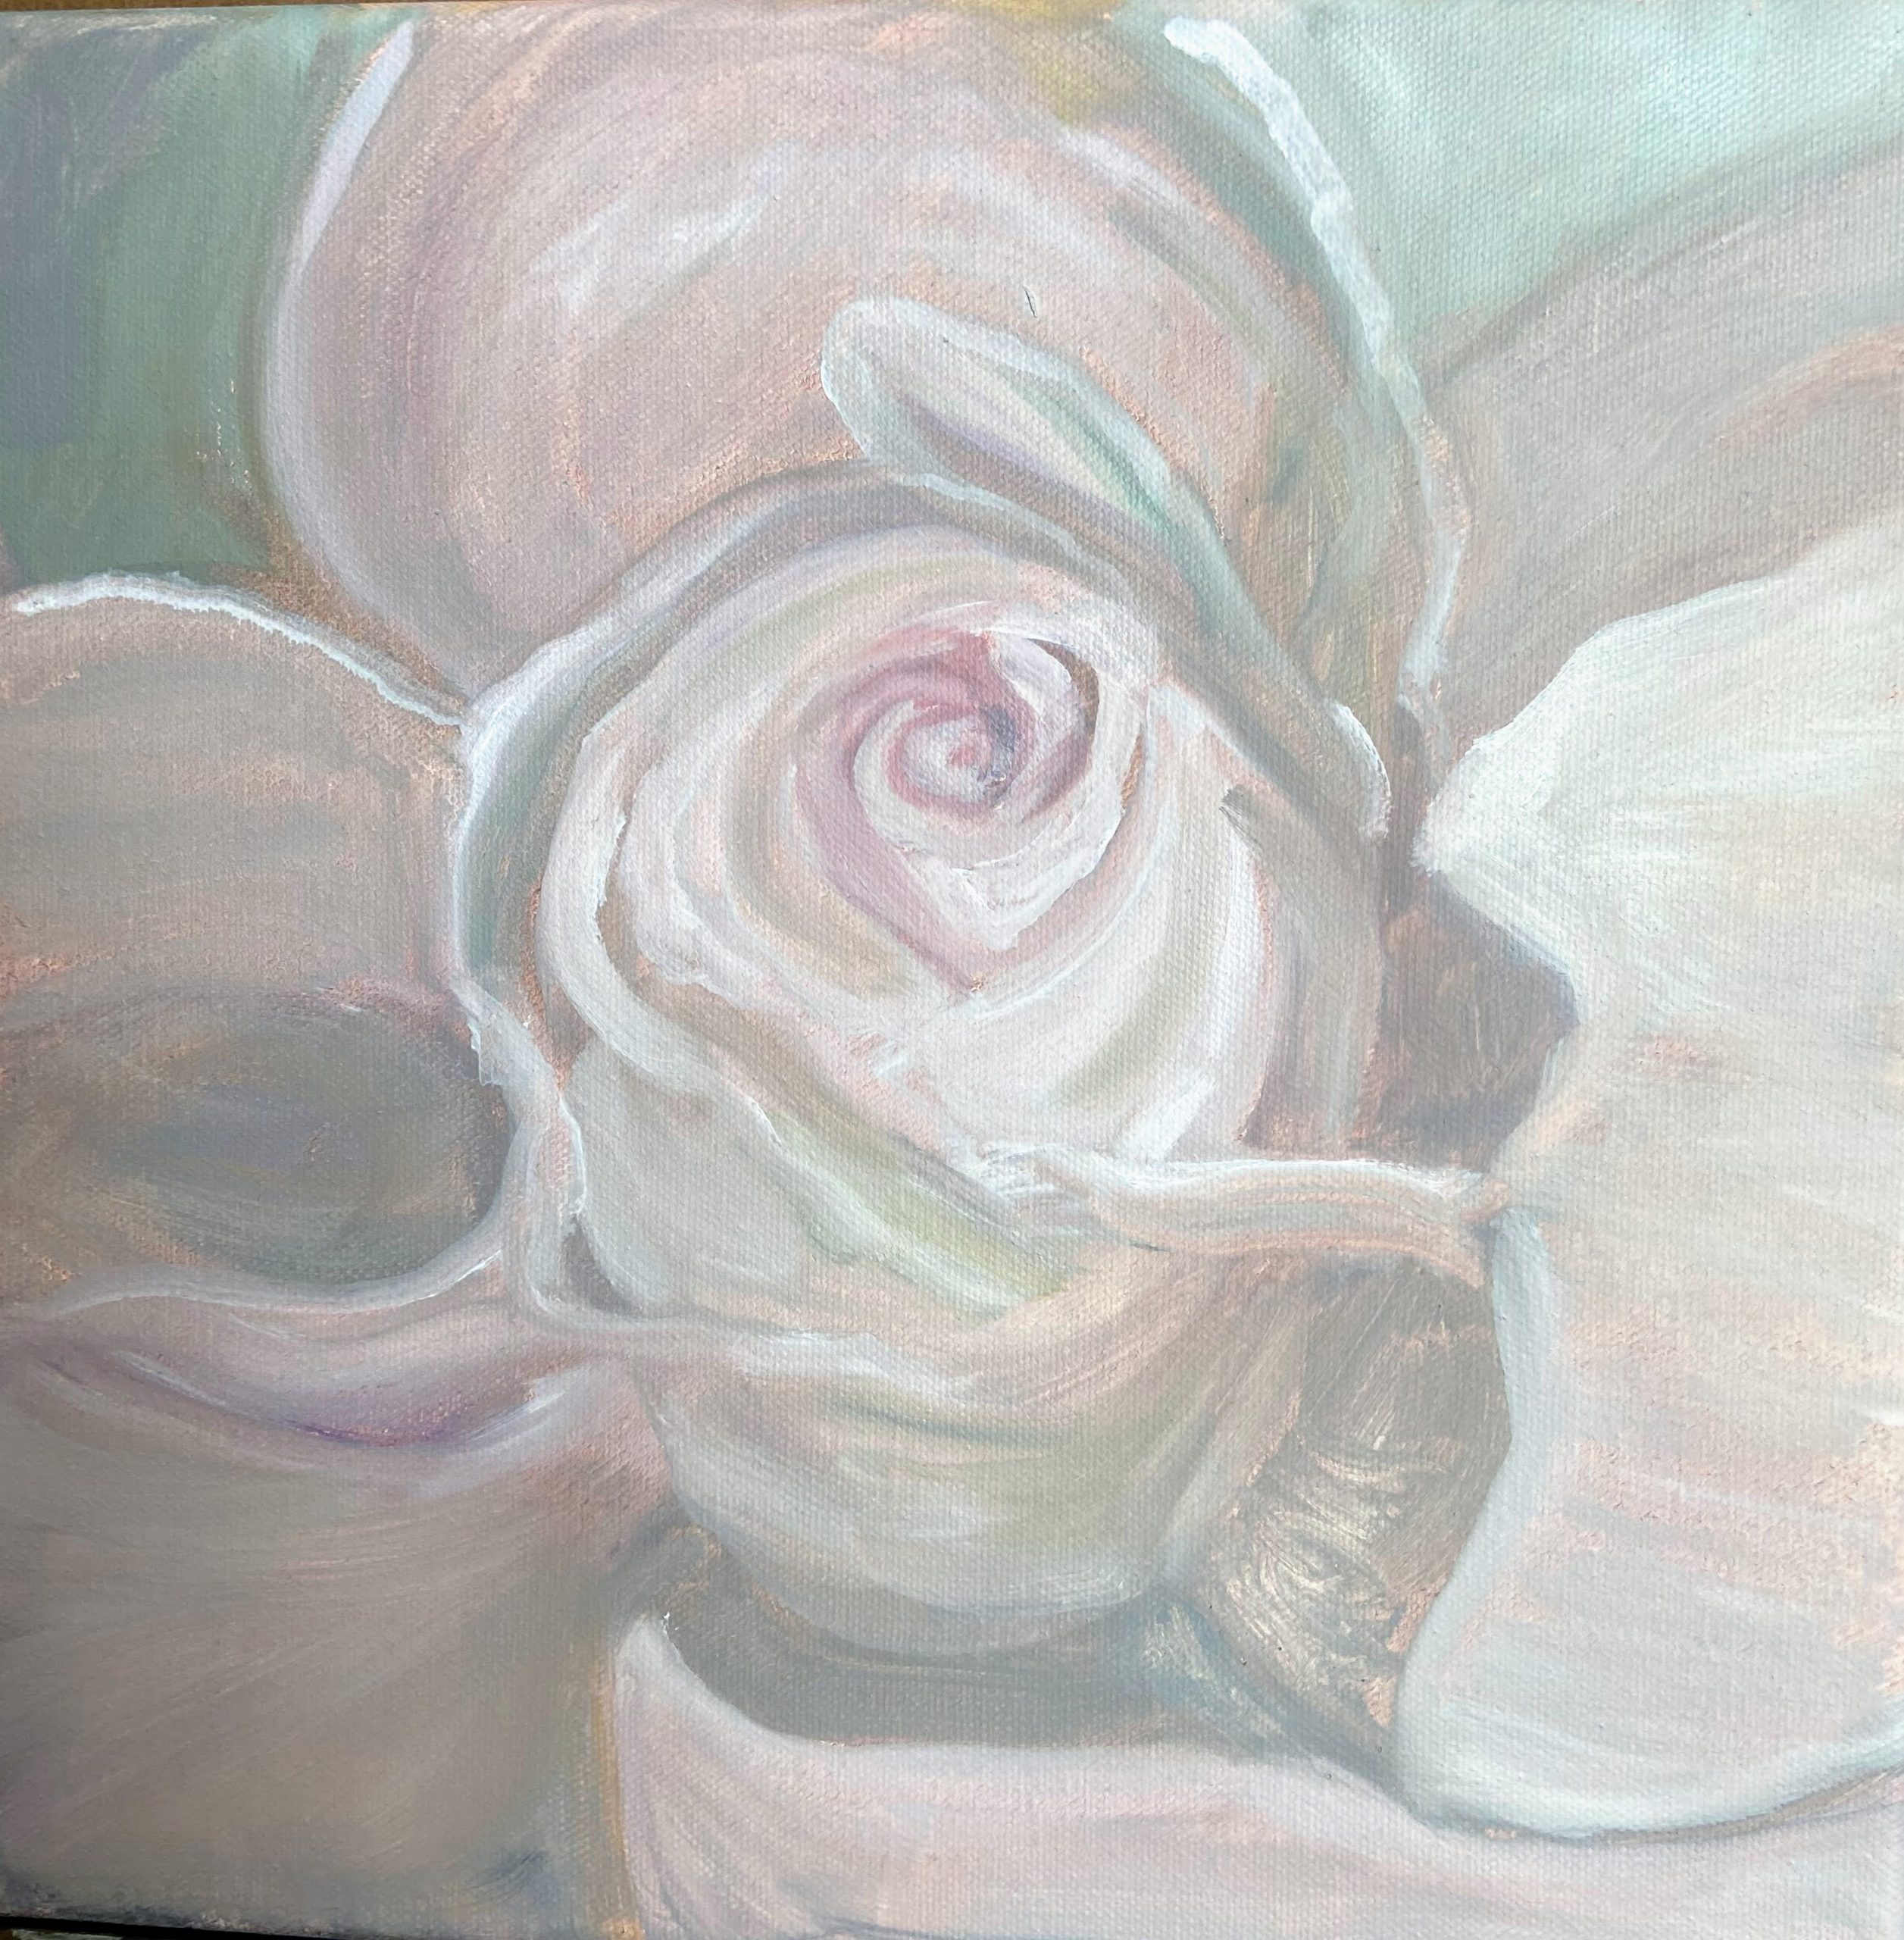 Acrylic painting of a rose done in white-on-white Alla Prima style